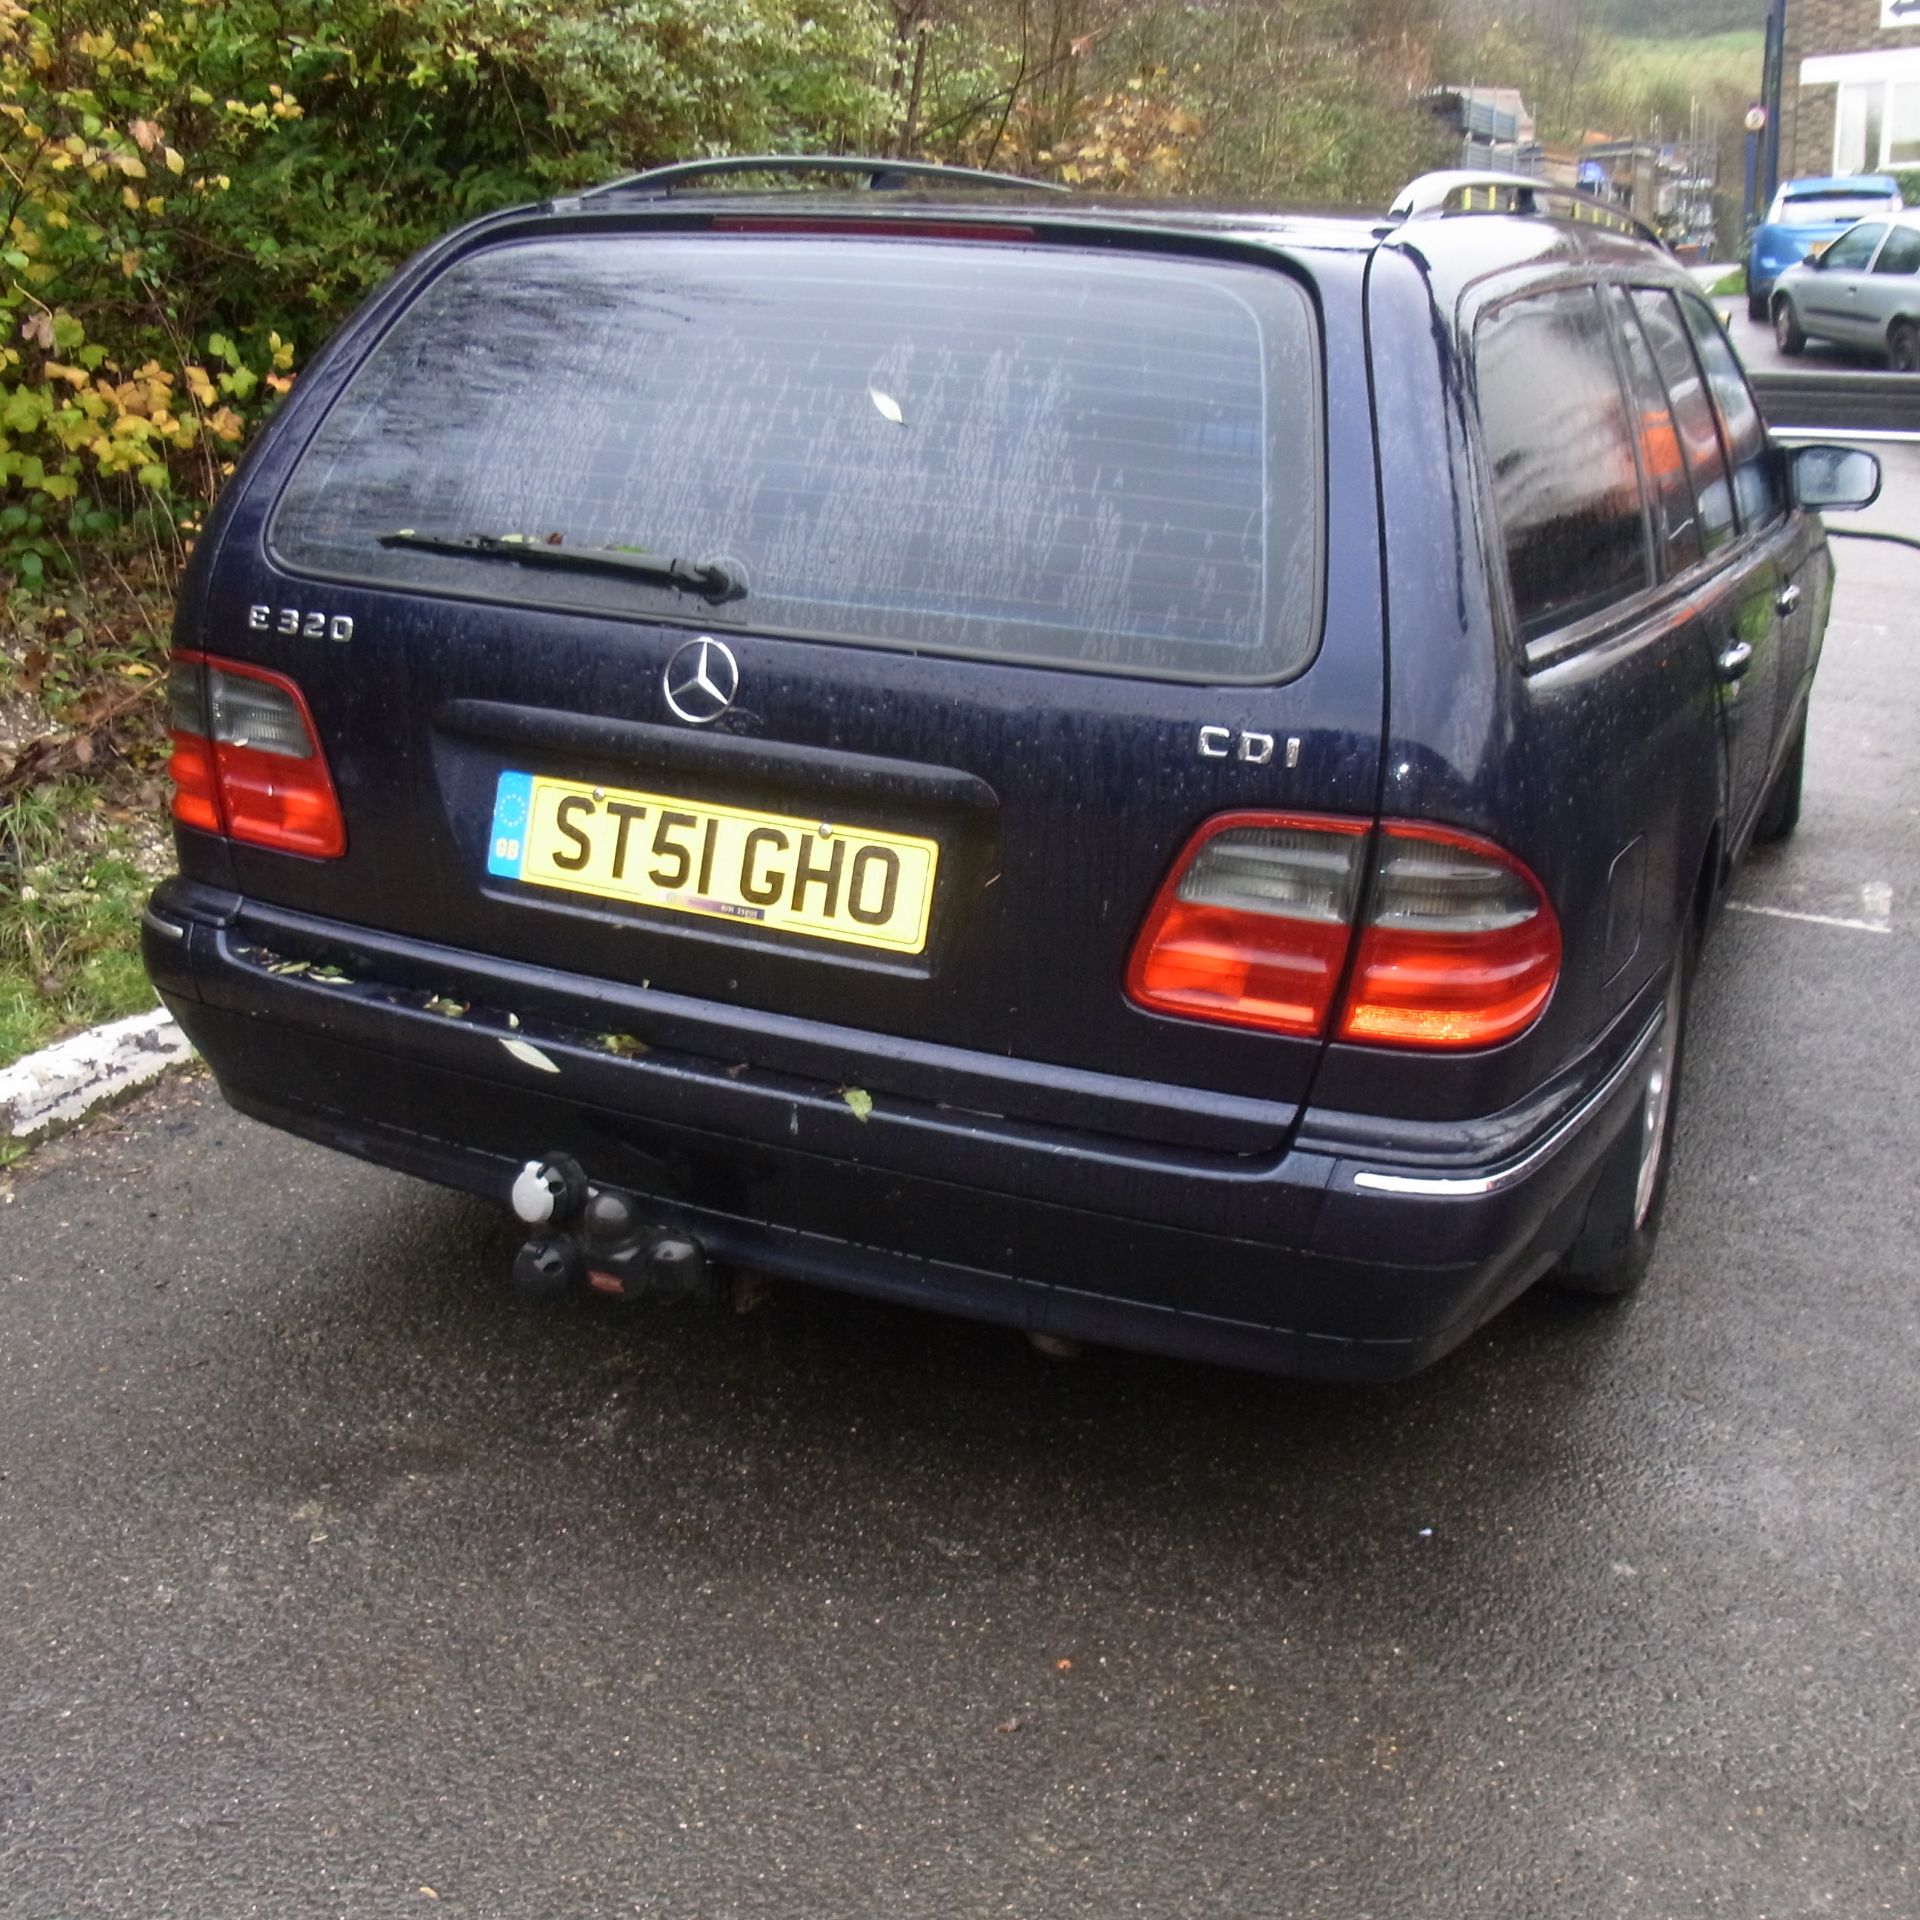 Lot 02 – ST51 GHO Mercedes E320 CDI Avantgarde Auto with V5 - Image 3 of 3